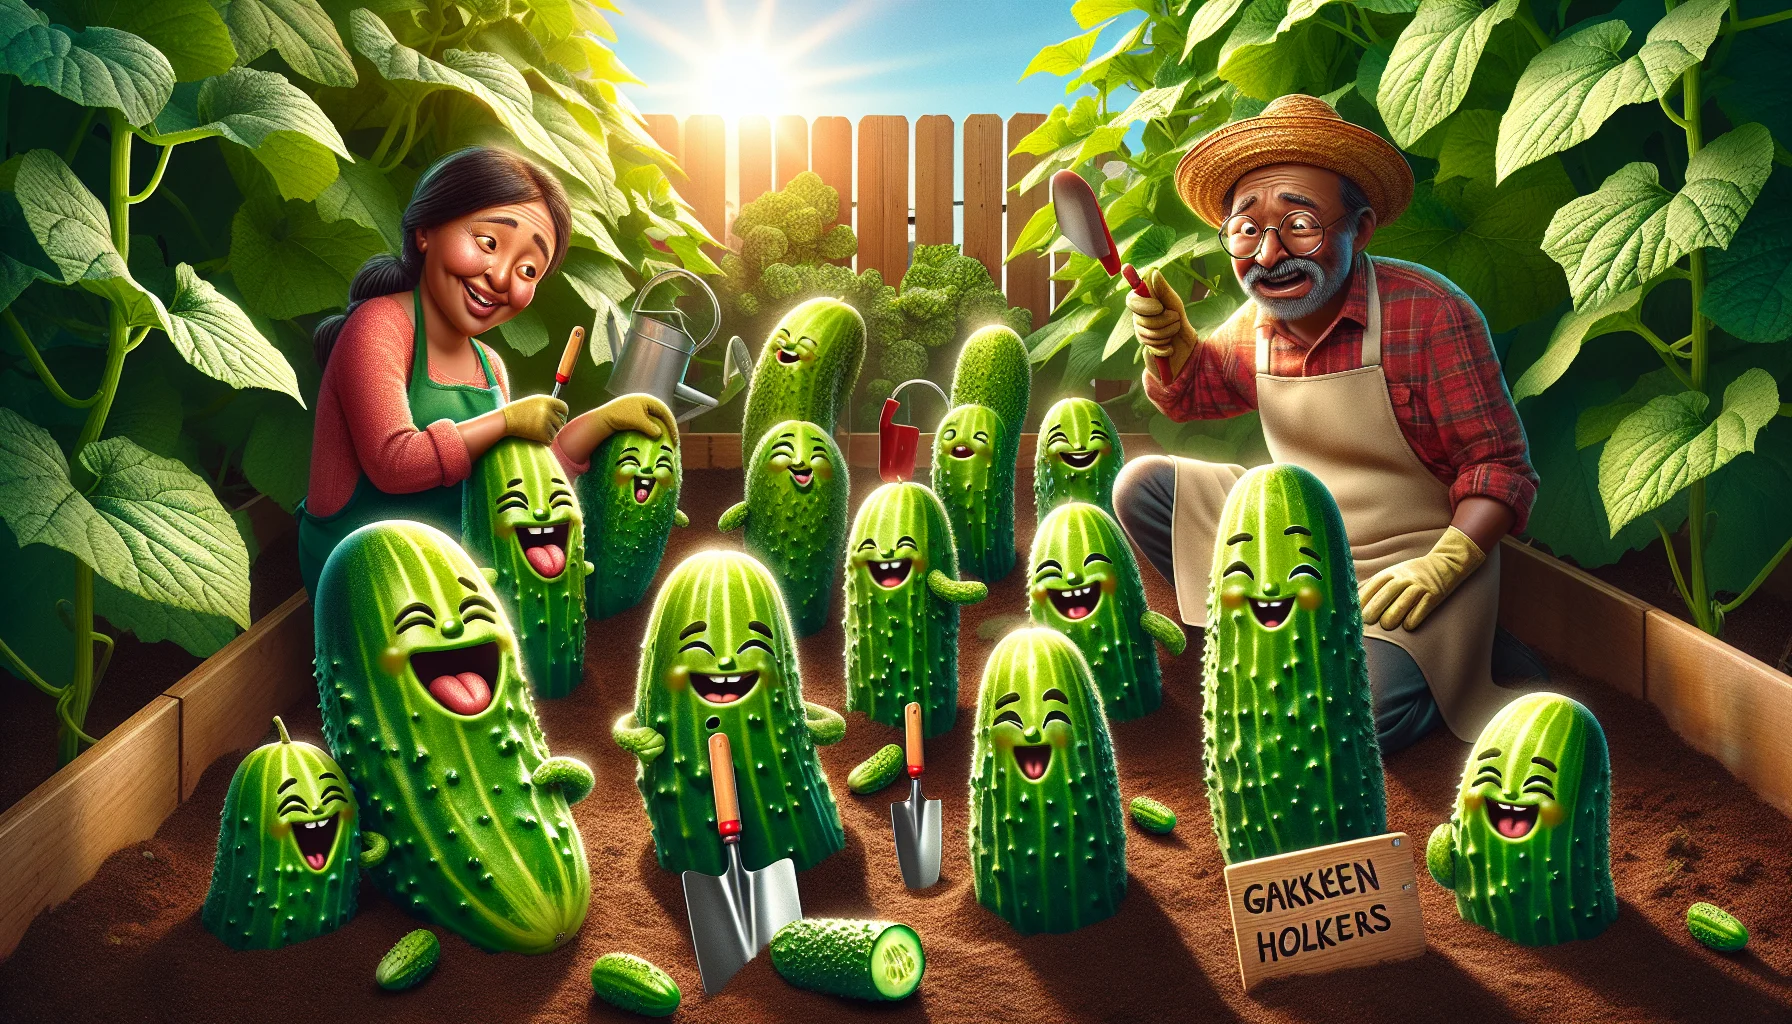 Create a lively and amusing scene of gardening where a variety of bush cucumbers thrive within a small garden plot. Each cucumber takes on a comical character, with little faces etched onto the plump, green fruit. A South Asian woman and a Black man, both in their gardening attire, look surprised and delighted by their unusually expressive harvest. Bright sunshine fills the scene, highlighting the rich green plants, the fresh earth and the dazzlingly colorful gardening tools. This scene invites the viewer to consider the joy and surprises nature holds, encouraging a love for gardening.